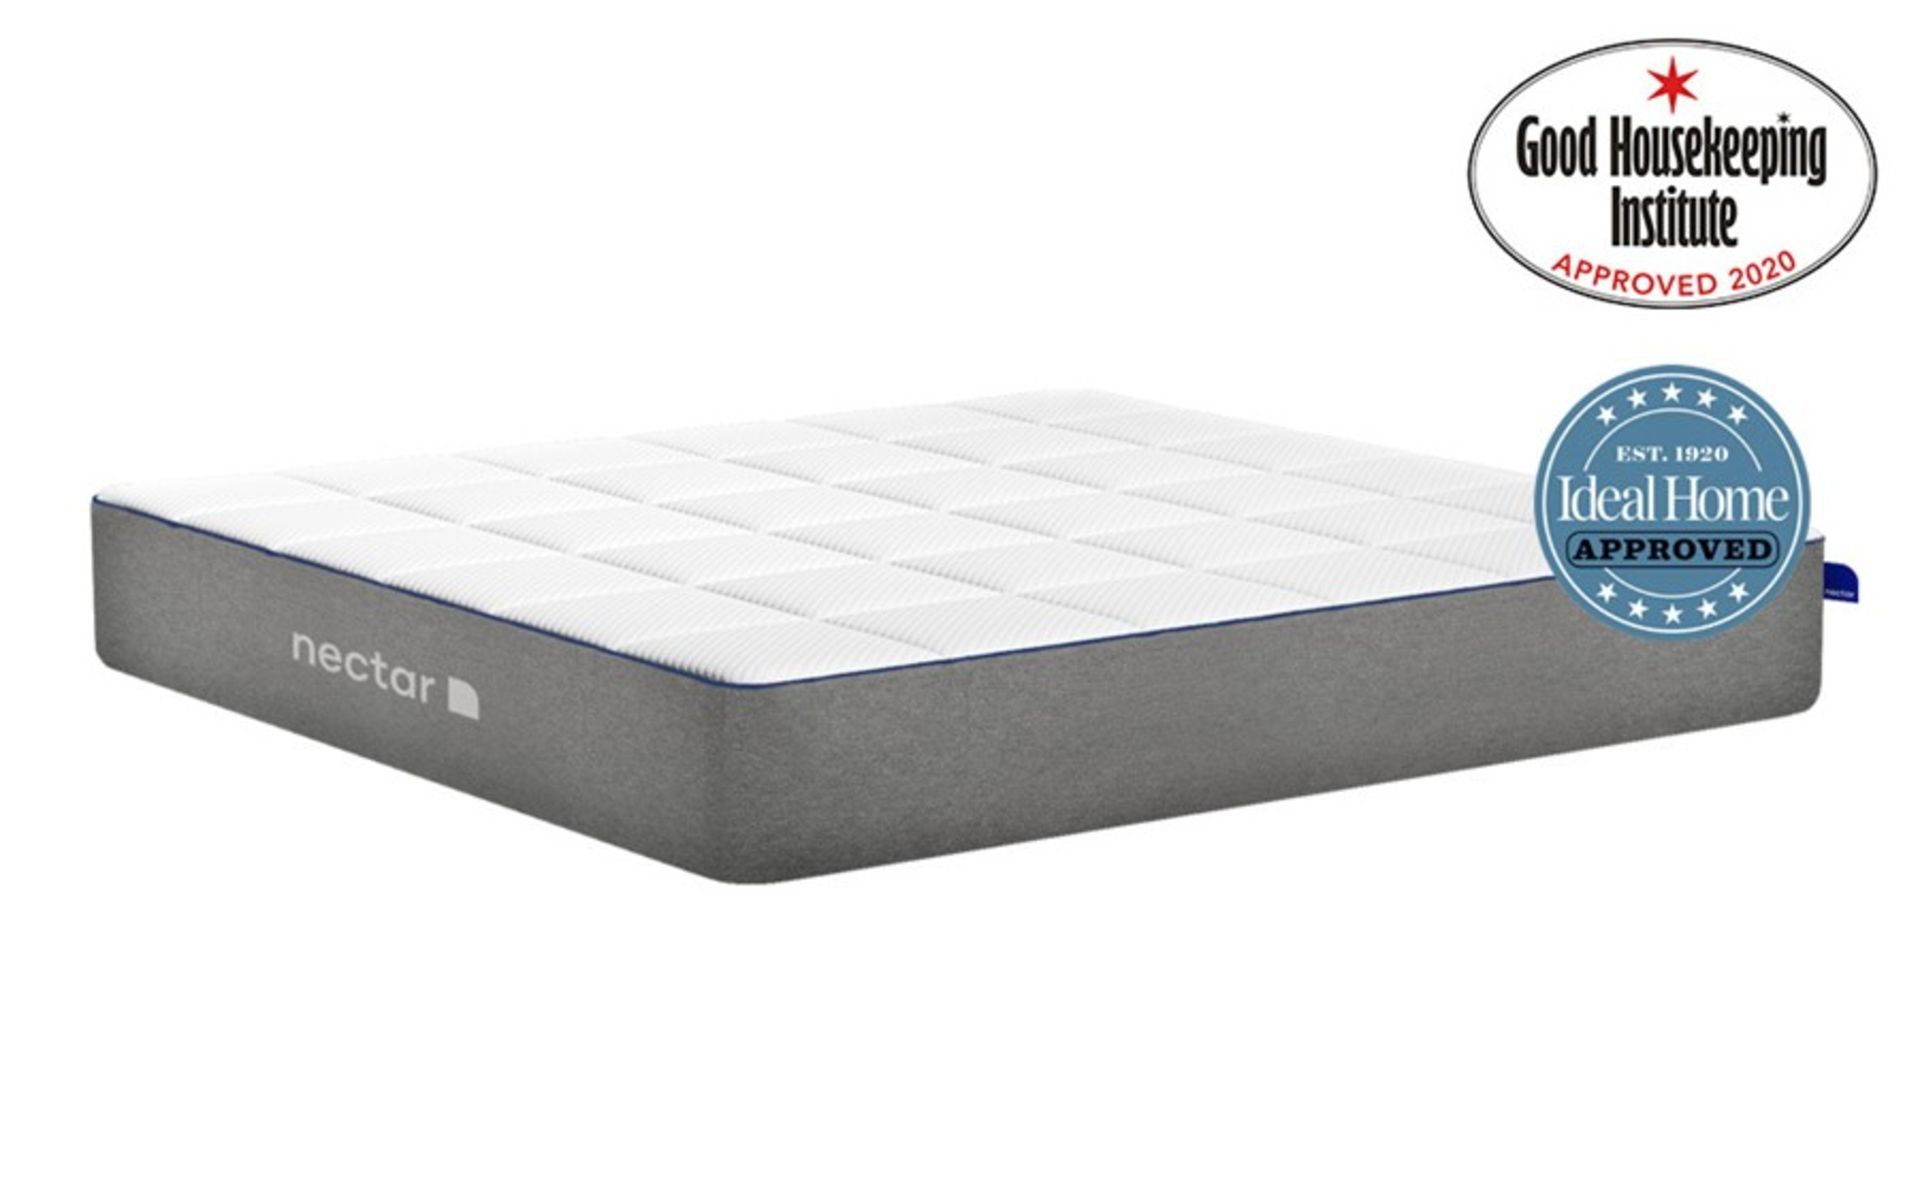 Nectar Professionally Refurbished Smart Pressure Relieving King size Memory Foam Mattress, This